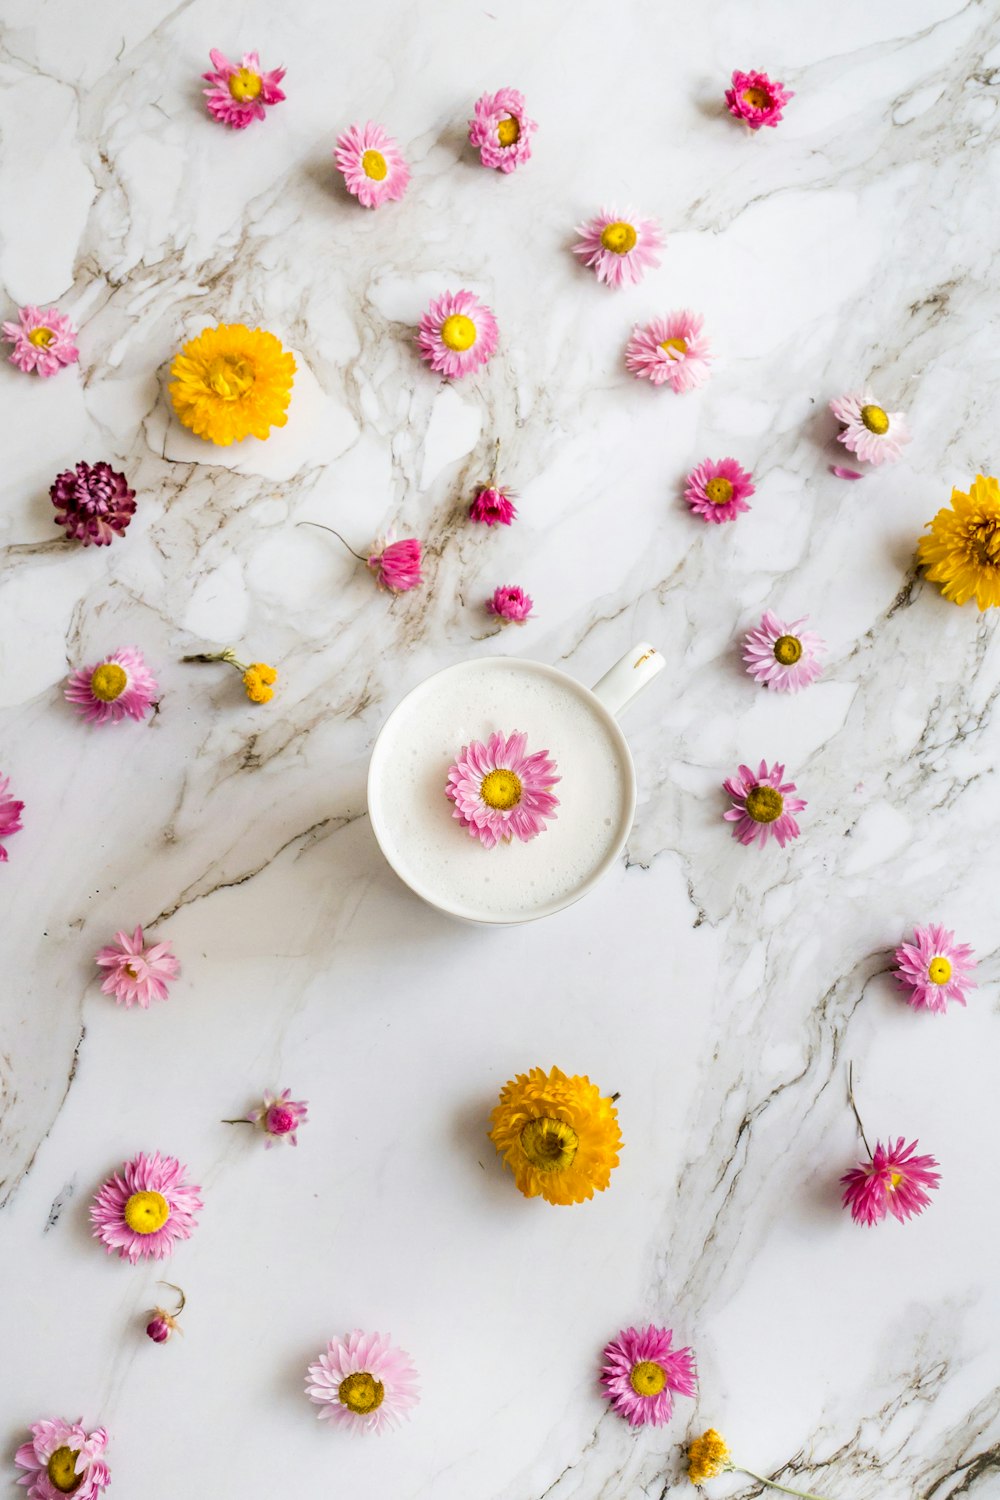 a bowl of flowers on a marble surface